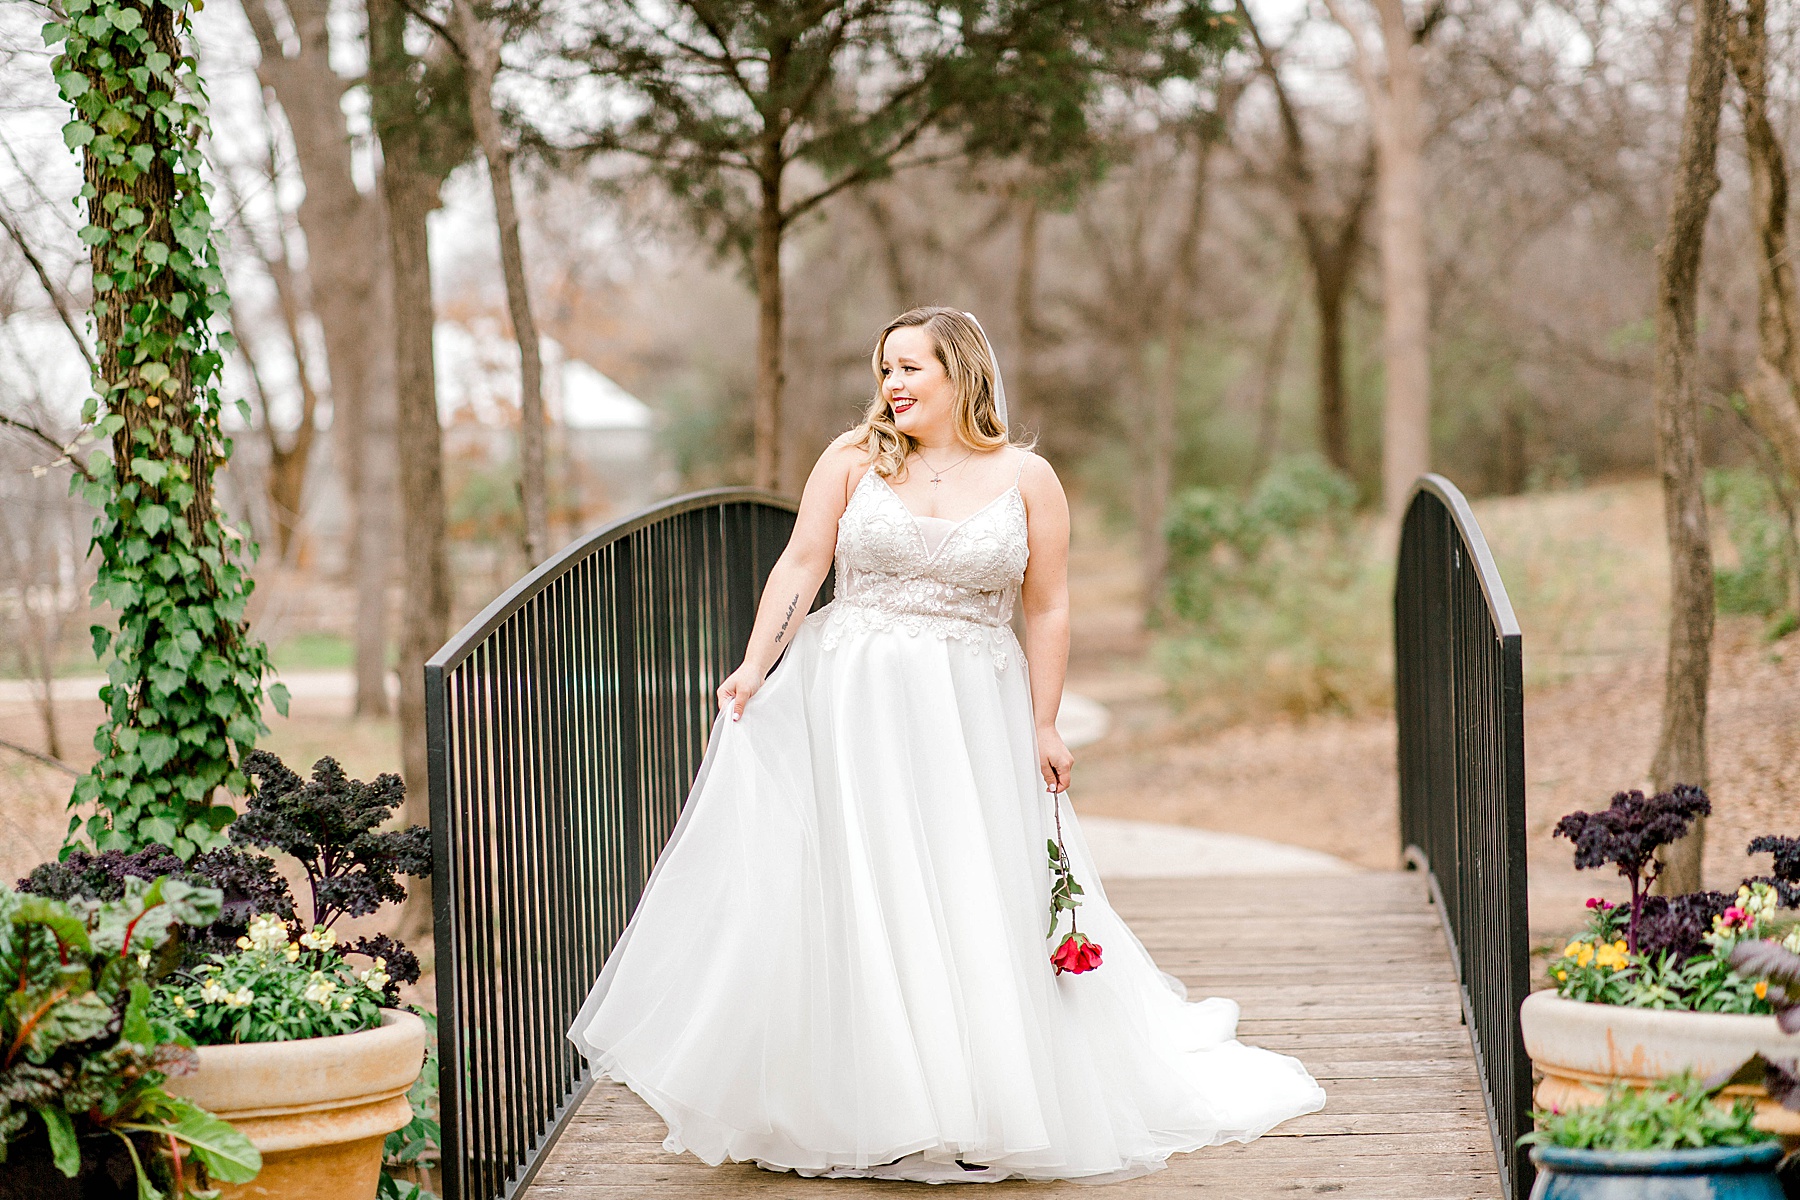 Beauty and the Beast Bridal Session (Grapevine, Texas) | Becca Sue Photography - beccasuephotography.com